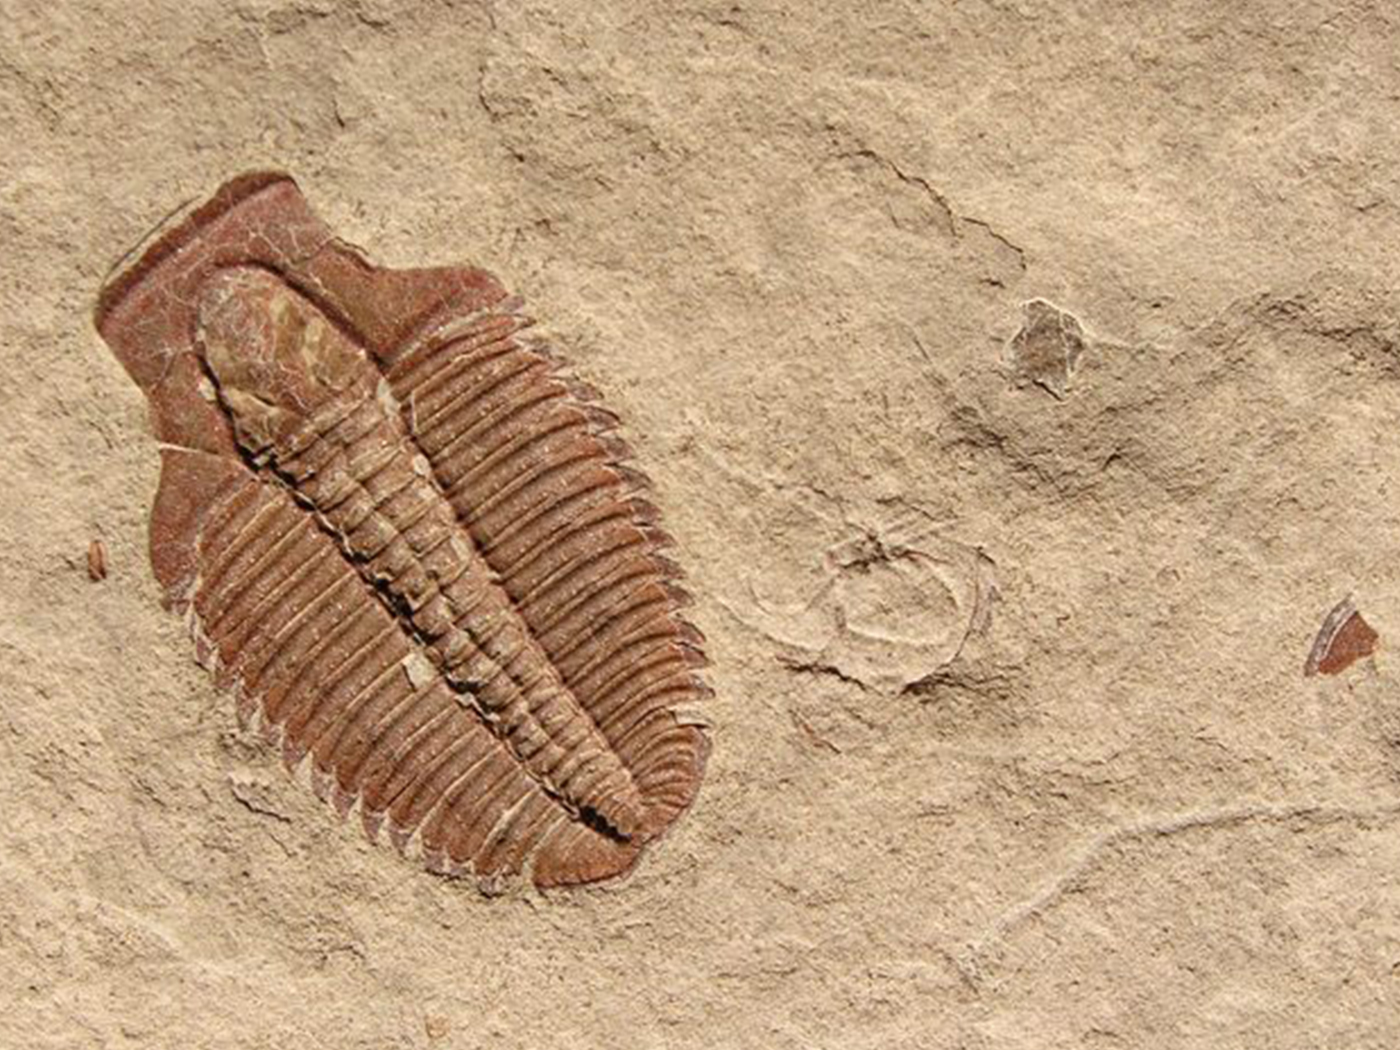 Cambrian Explosion Alive and Well | The Institute for Creation Research